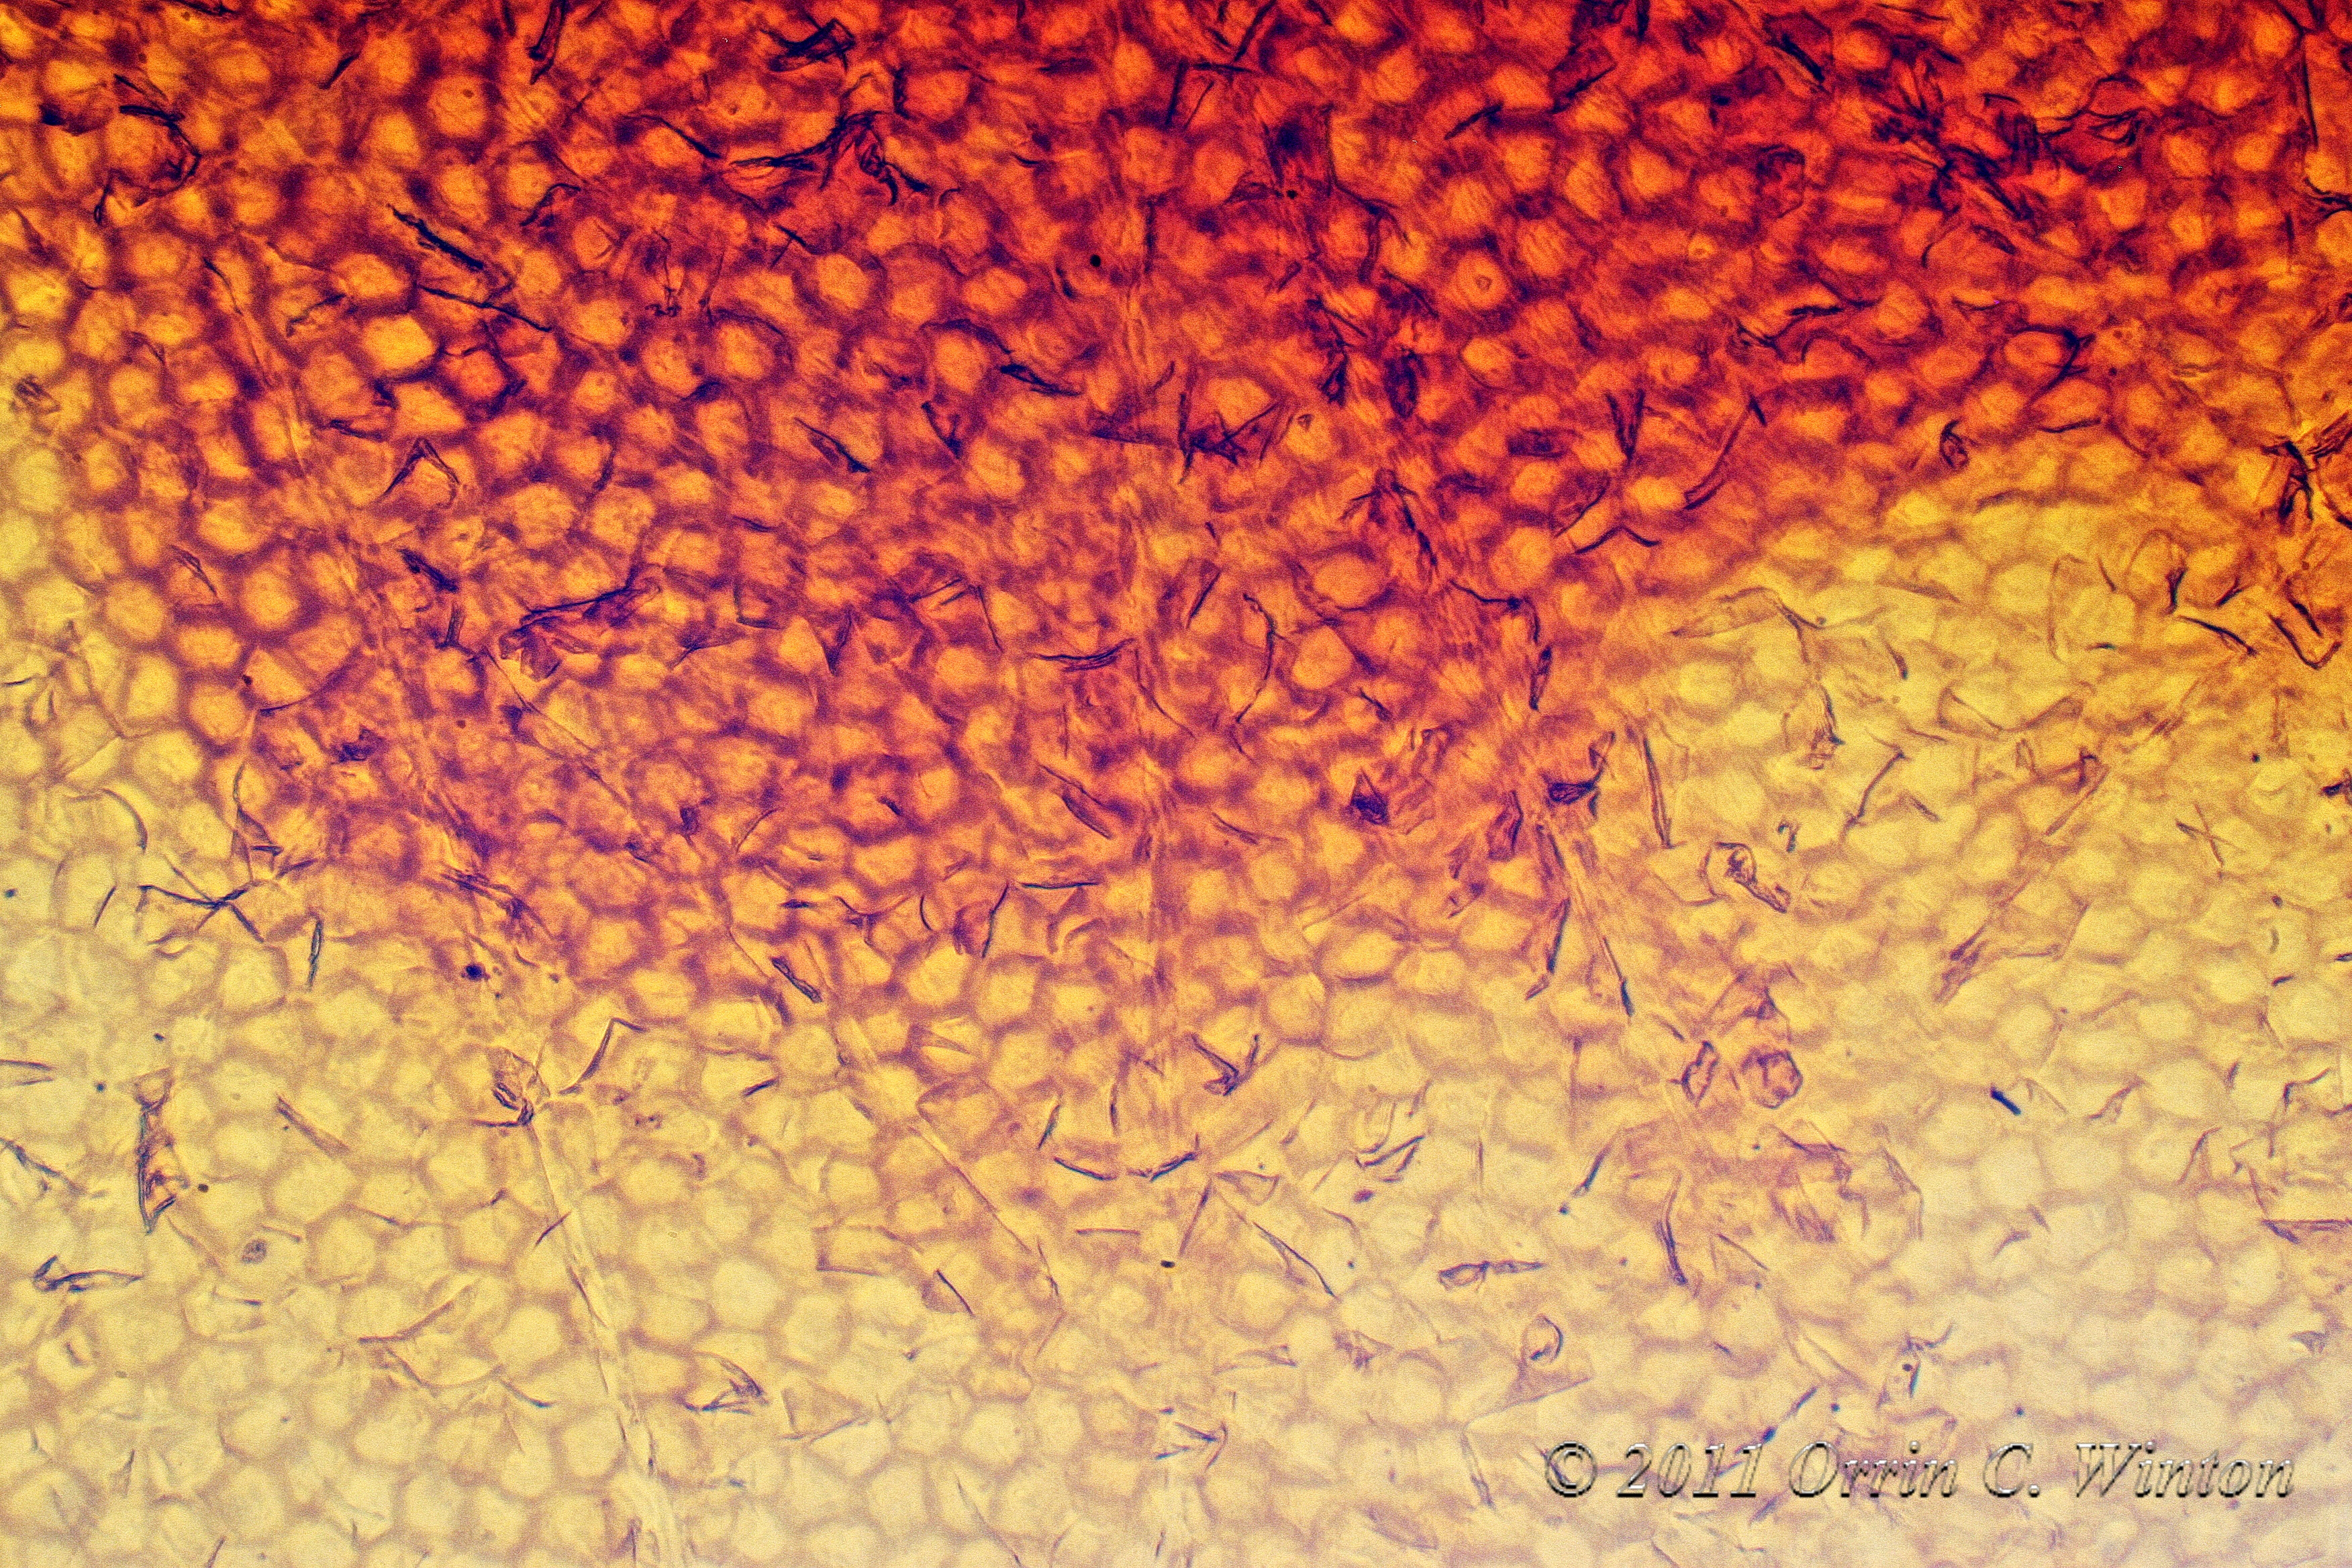 skin-cells-pmax-a | Orrin Winton's Photography